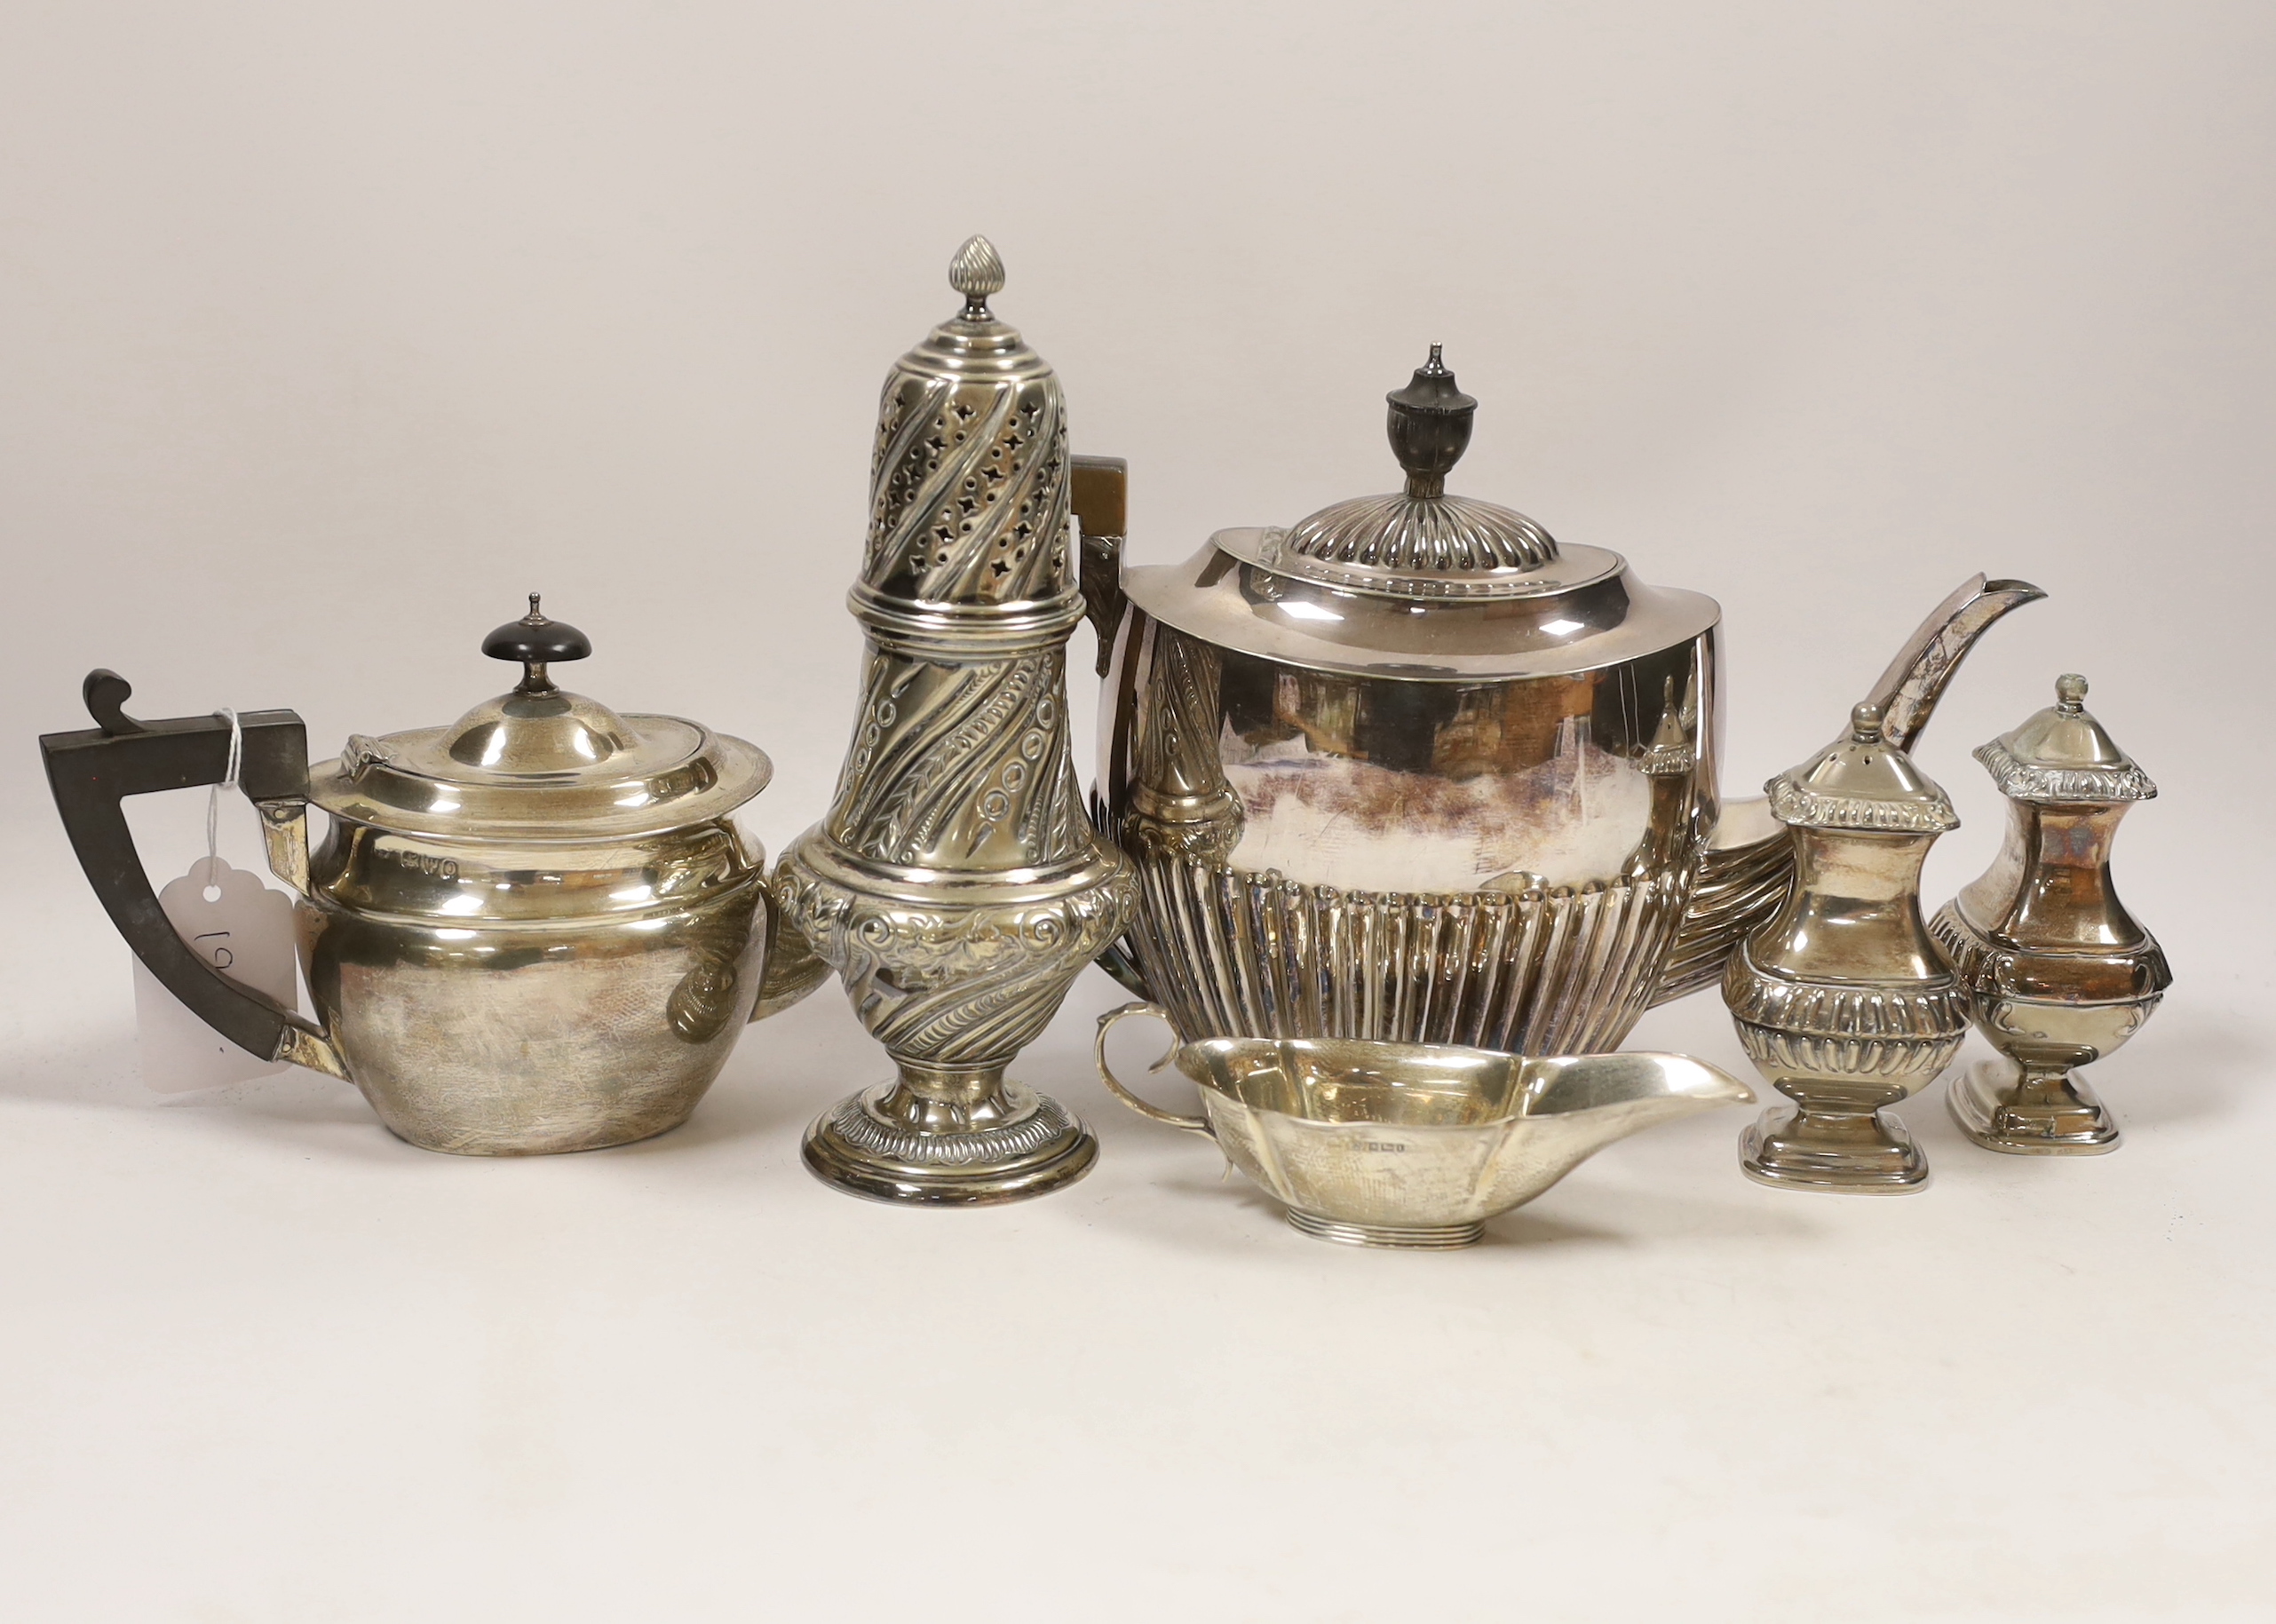 A late Victorian silver bachelor's oval teapot, Florence Warden, Chester, 1897, together with a small Edwardian silver sauceboat and four items of plated ware including a sugar caster and teapot